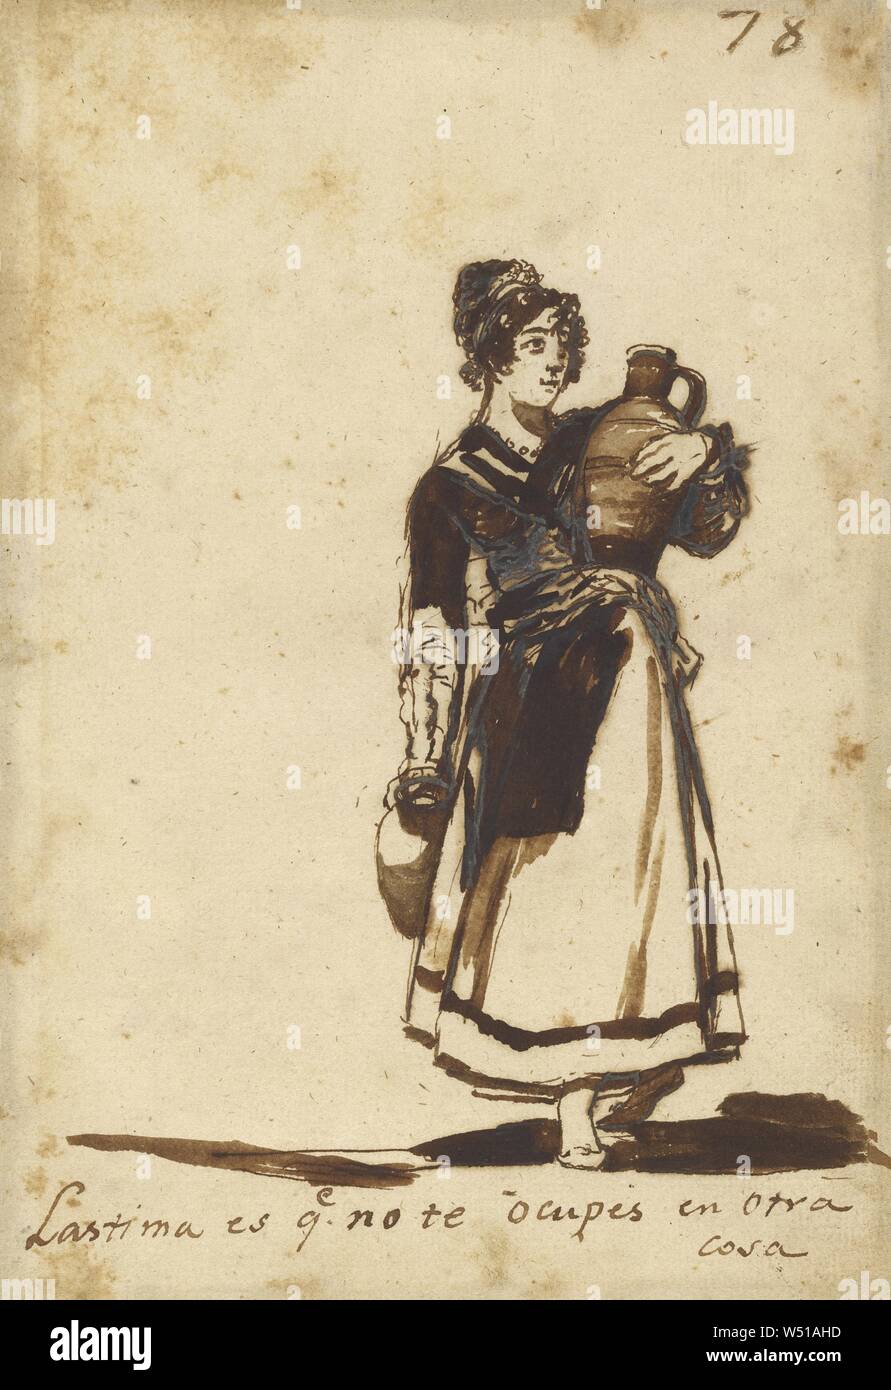 It's a Pity You Don't Have Something Else to Do!, Francisco José de Goya y Lucientes (Francisco de Goya) (Spanish, 1746 - 1828), about 1808 - 1814, Brush and sepia wash and pen and black ink, 20.3 x 14 cm (8 x 5 1/2 in Stock Photo